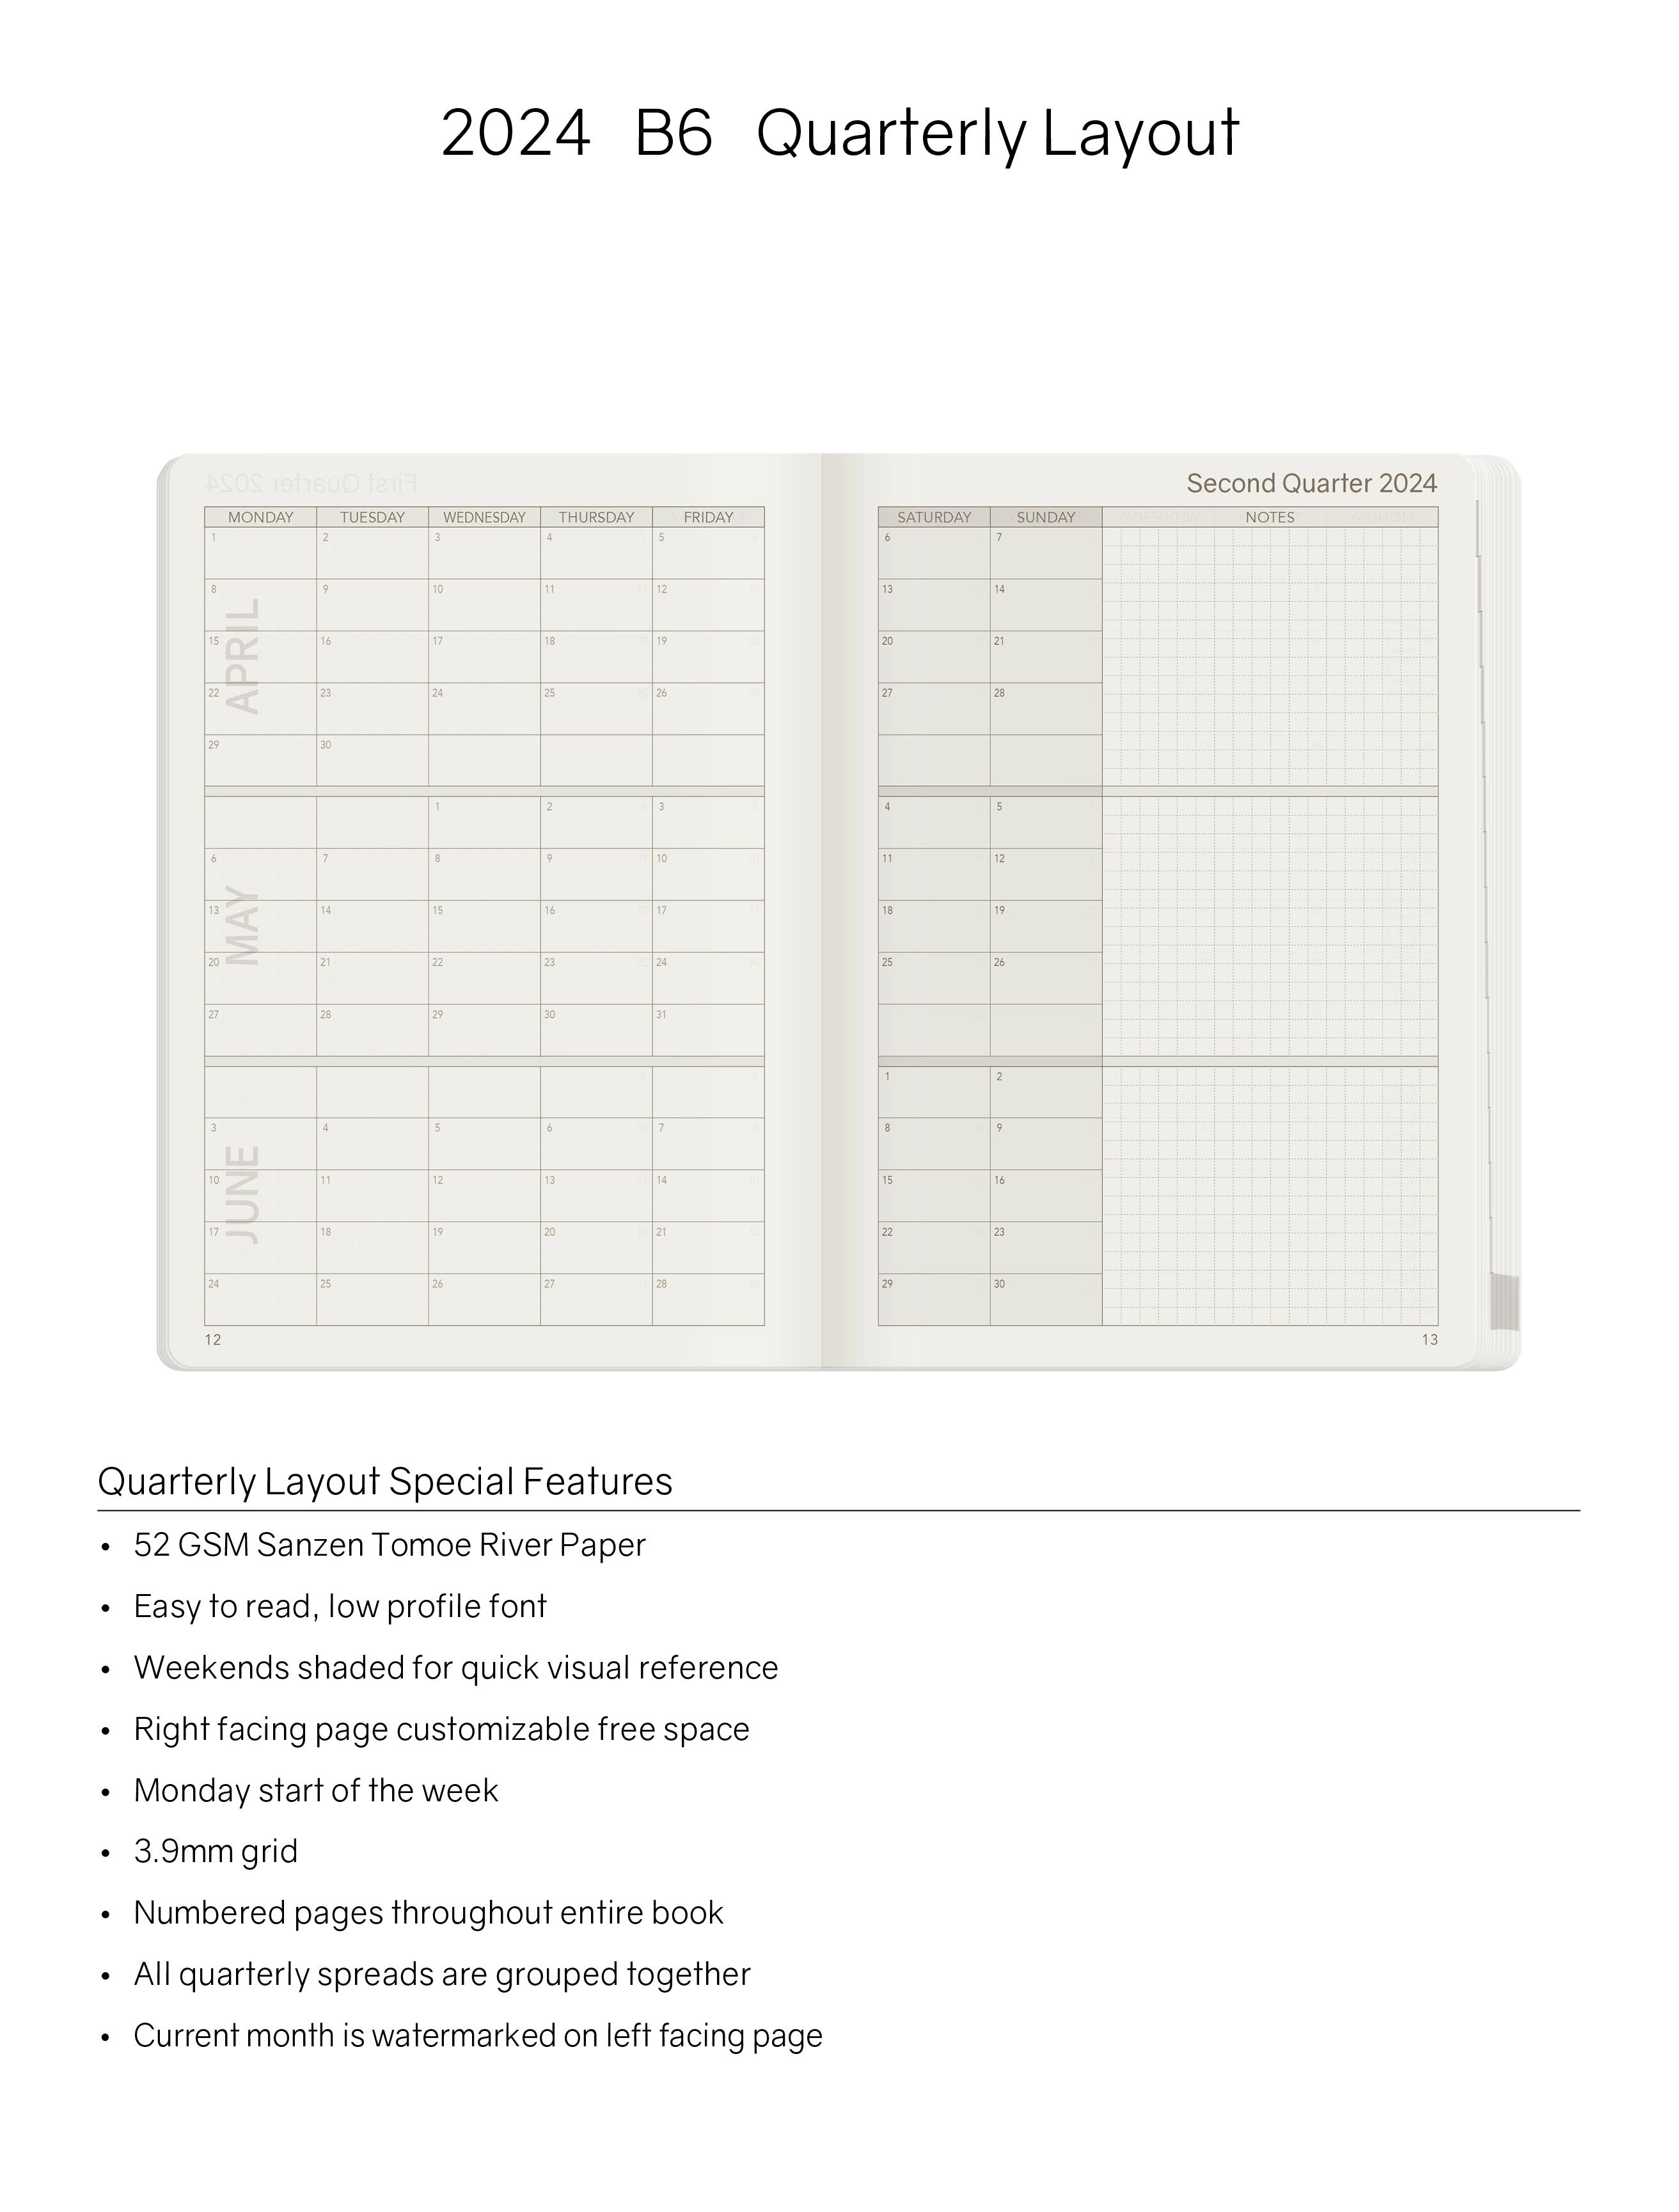 2024 B6 Weekly Planner -Midnight Sky (Black) - 52gsmTomoe River Paper (All in One)